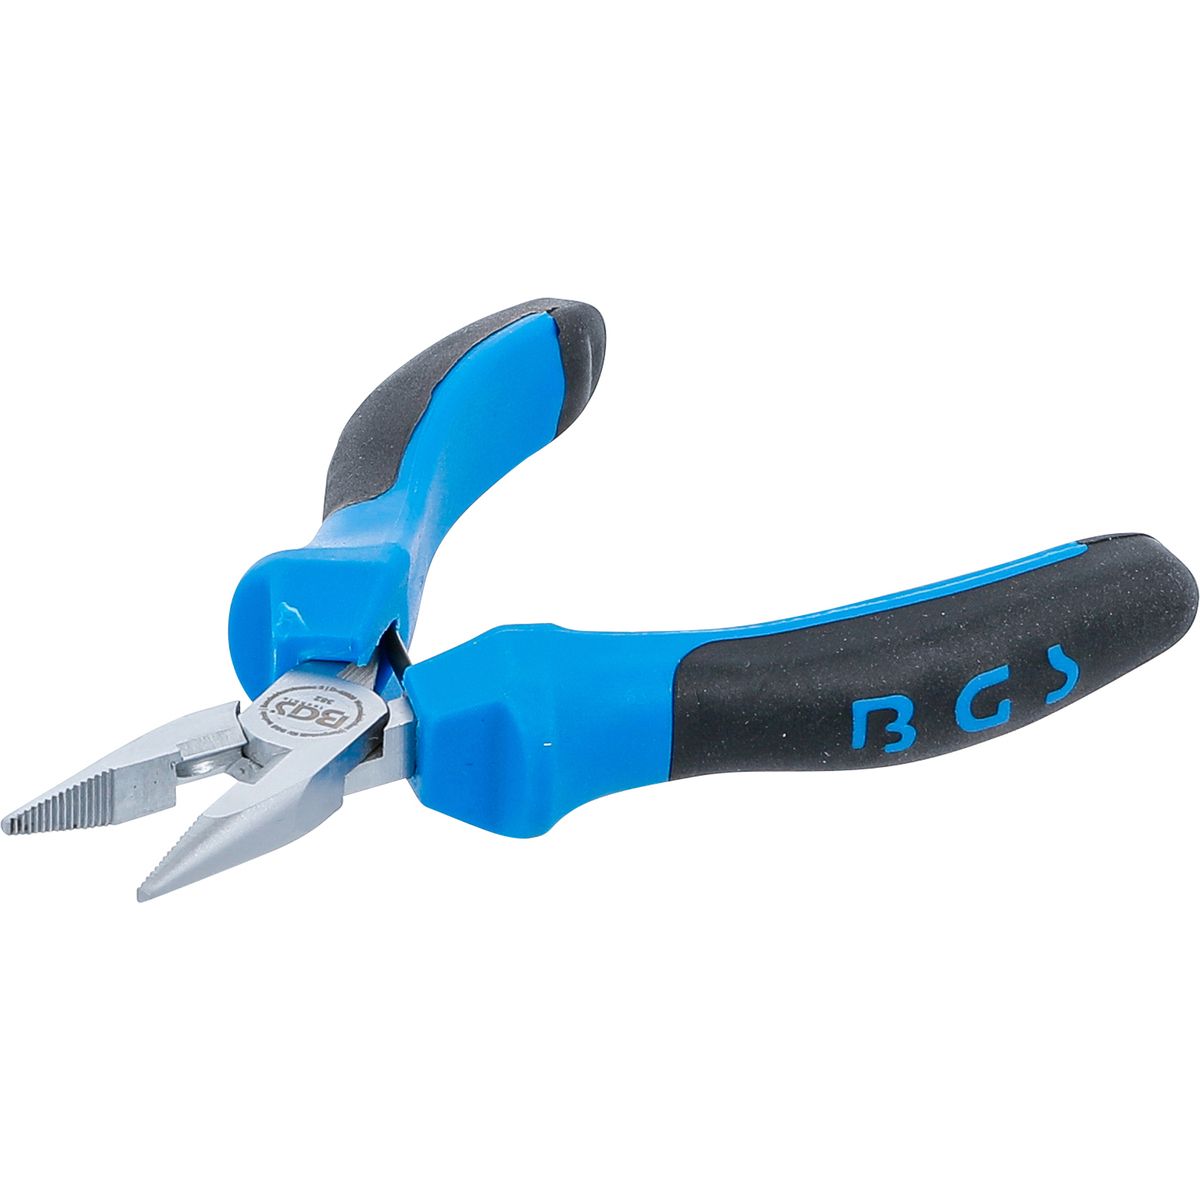 Electronic long nose pliers